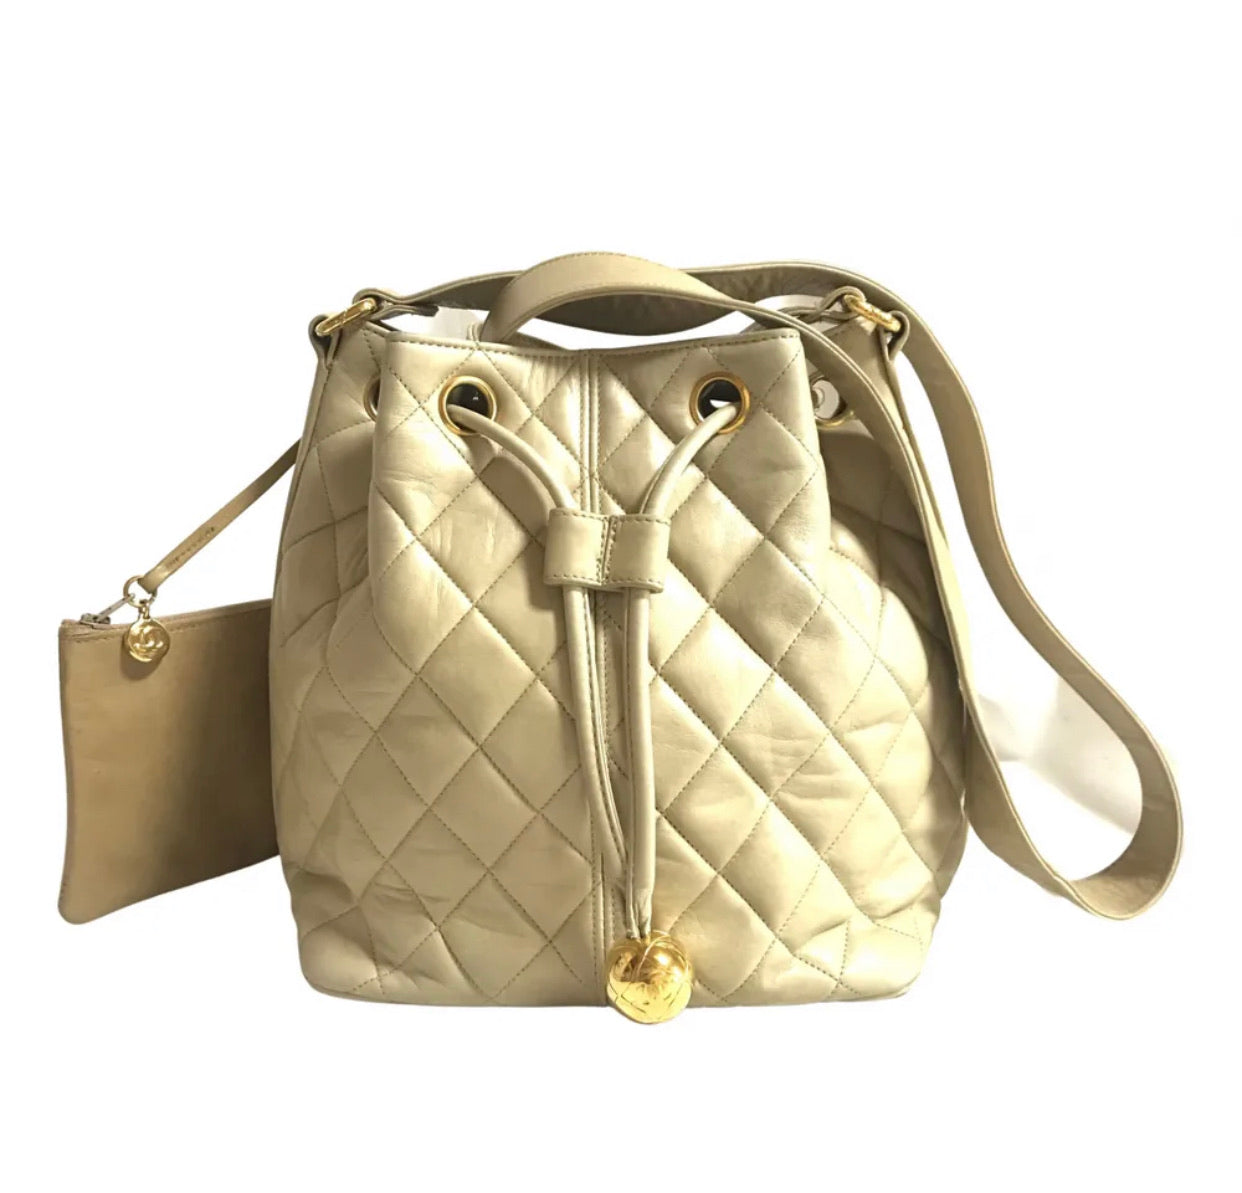 Chanel Pre-owned 2000-2002 Diamond-Quilted CC Logo Plaque Shoulder Bag - Neutrals